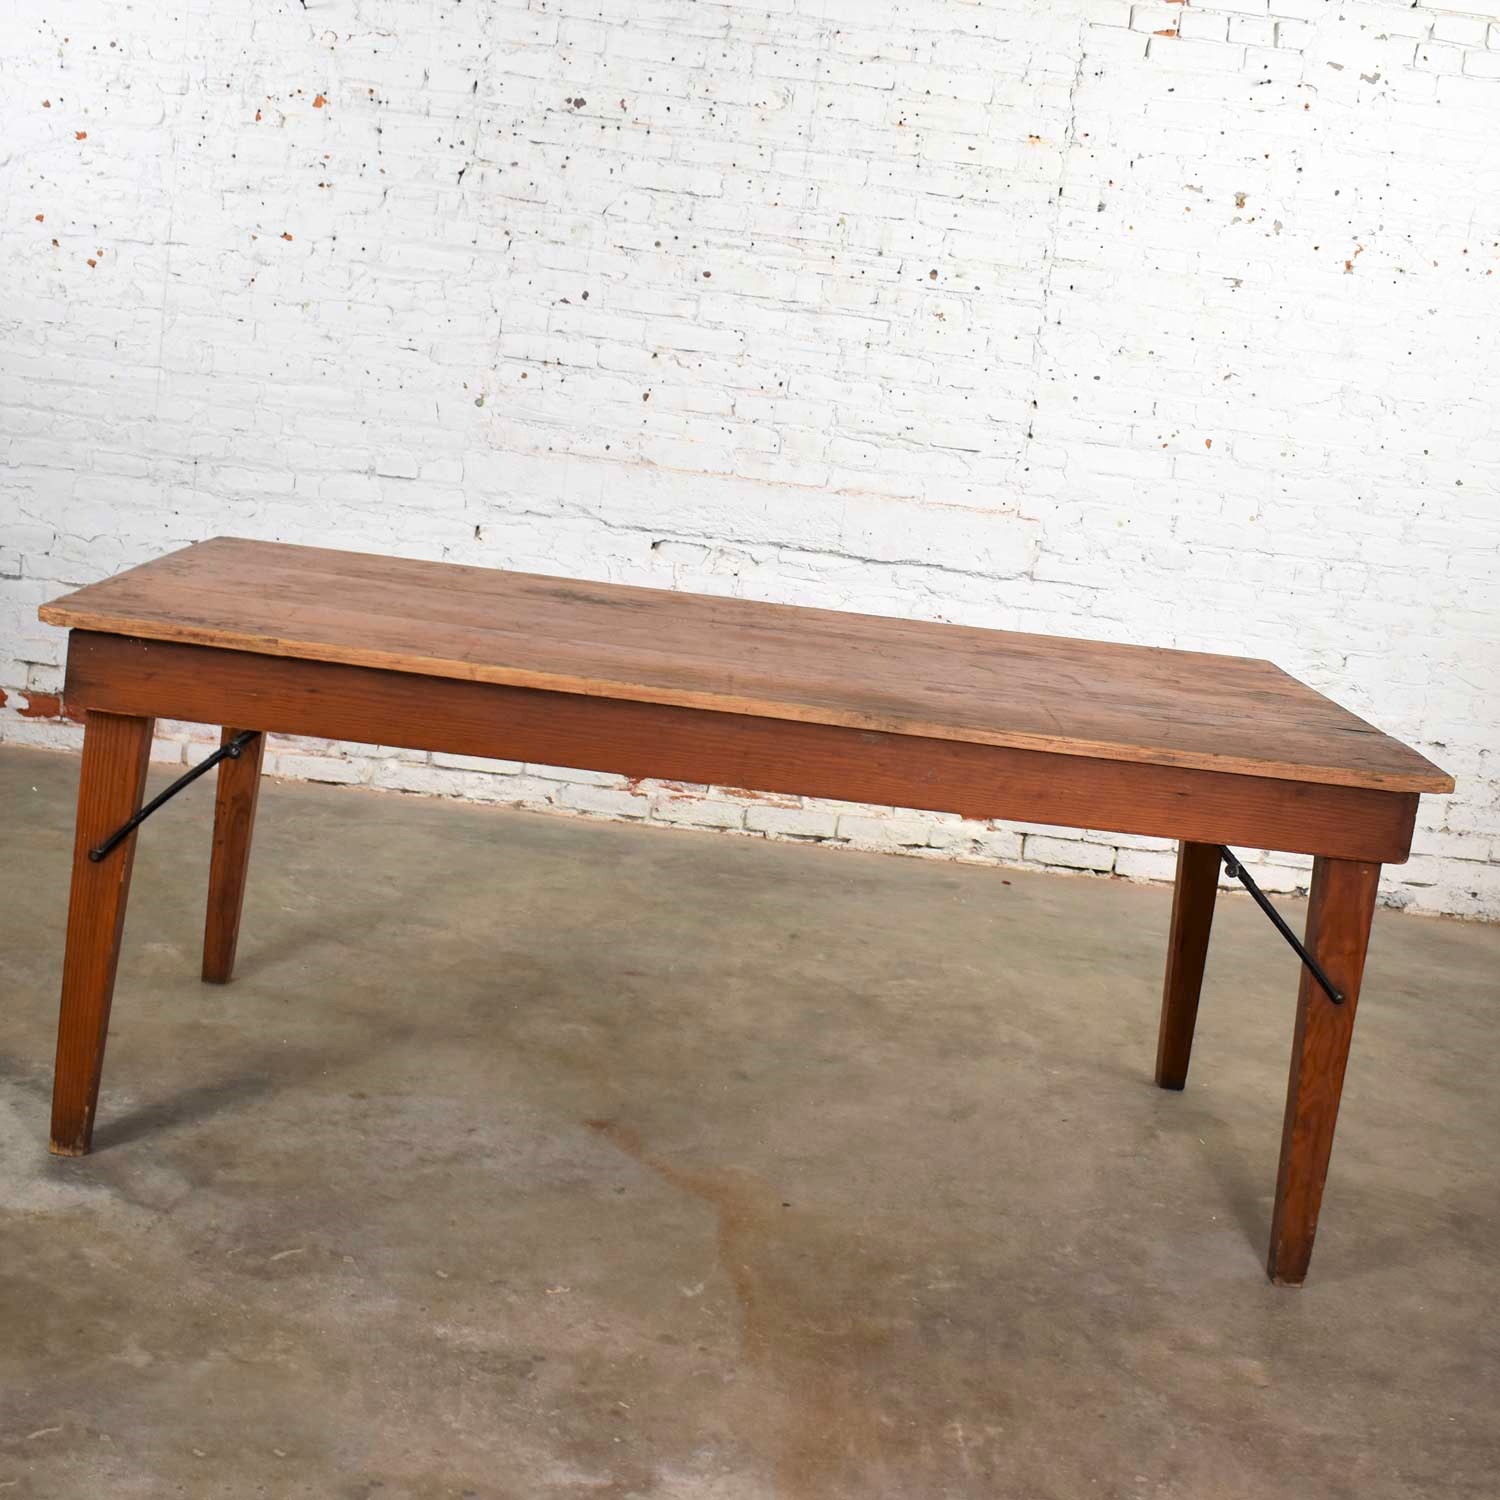 Vintage Pine Industrial Rustic Worktable or Farmhouse Table with Folding Legs